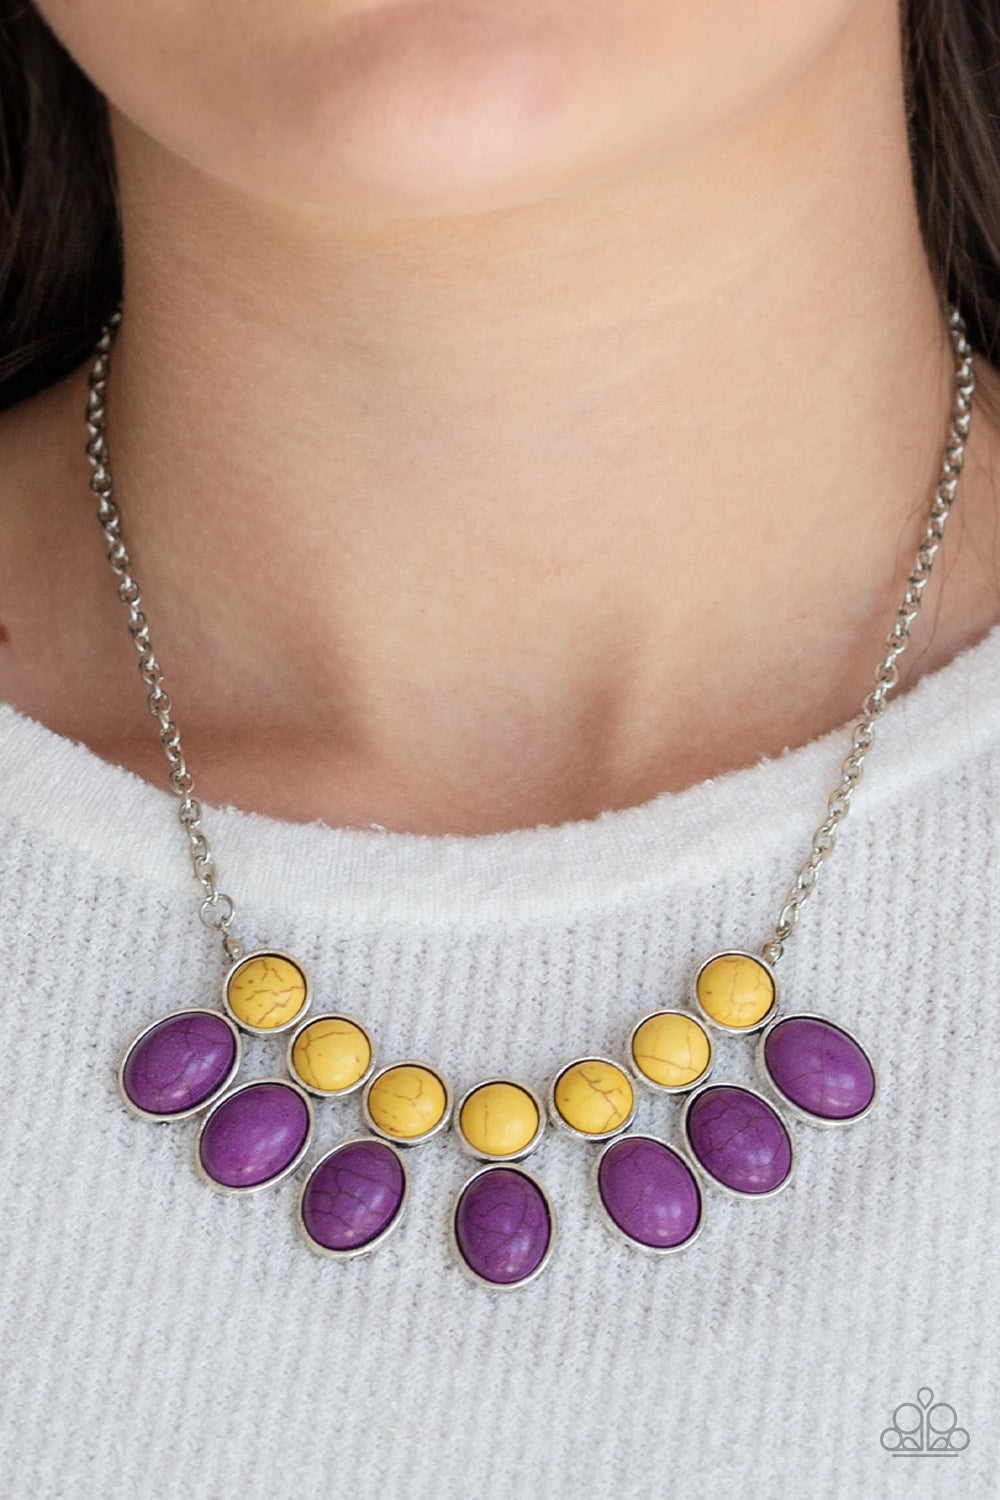 &lt;p&gt;Round yellow stone beads connect to oval purple stone beads, creating an earthy fringe below the collar for a seasonal look. Features an adjustable clasp closure.&lt;/p&gt;

&lt;p&gt;&lt;i&gt; Sold as one individual necklace.  Includes one pair of matching earrings.
&lt;/i&gt;&lt;/p&gt;

